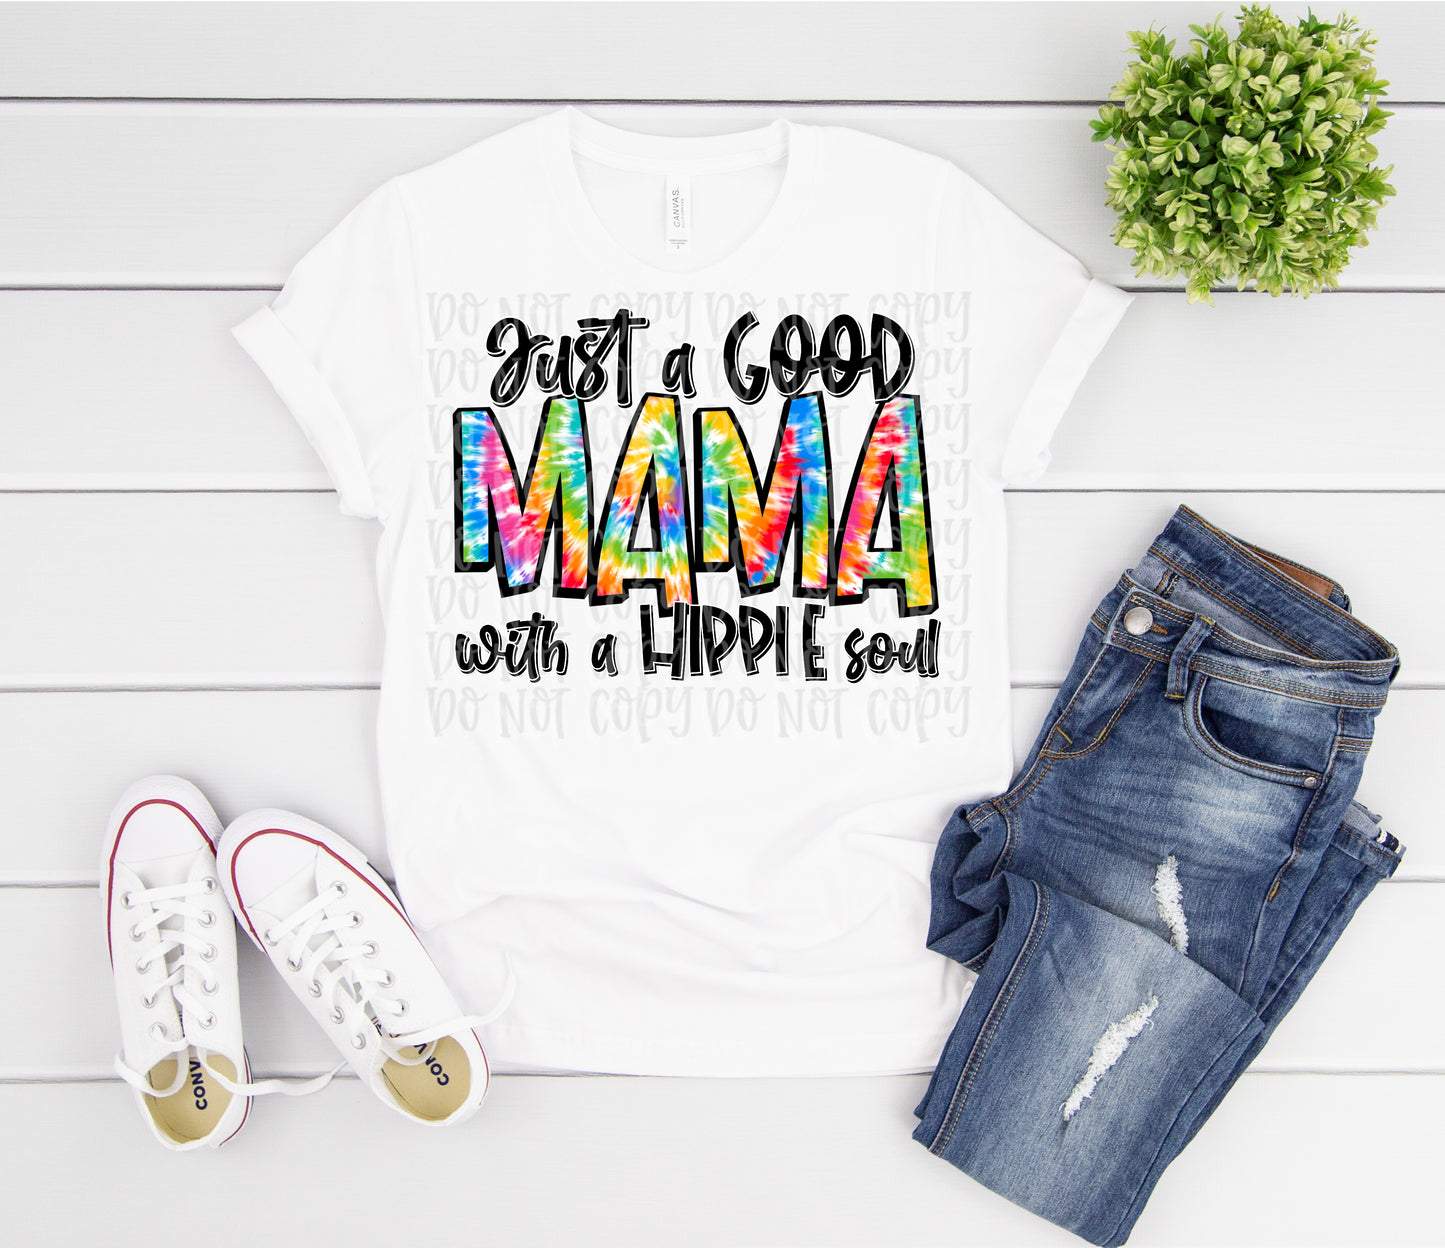 Just a Good Mama -Hippie Soul 2